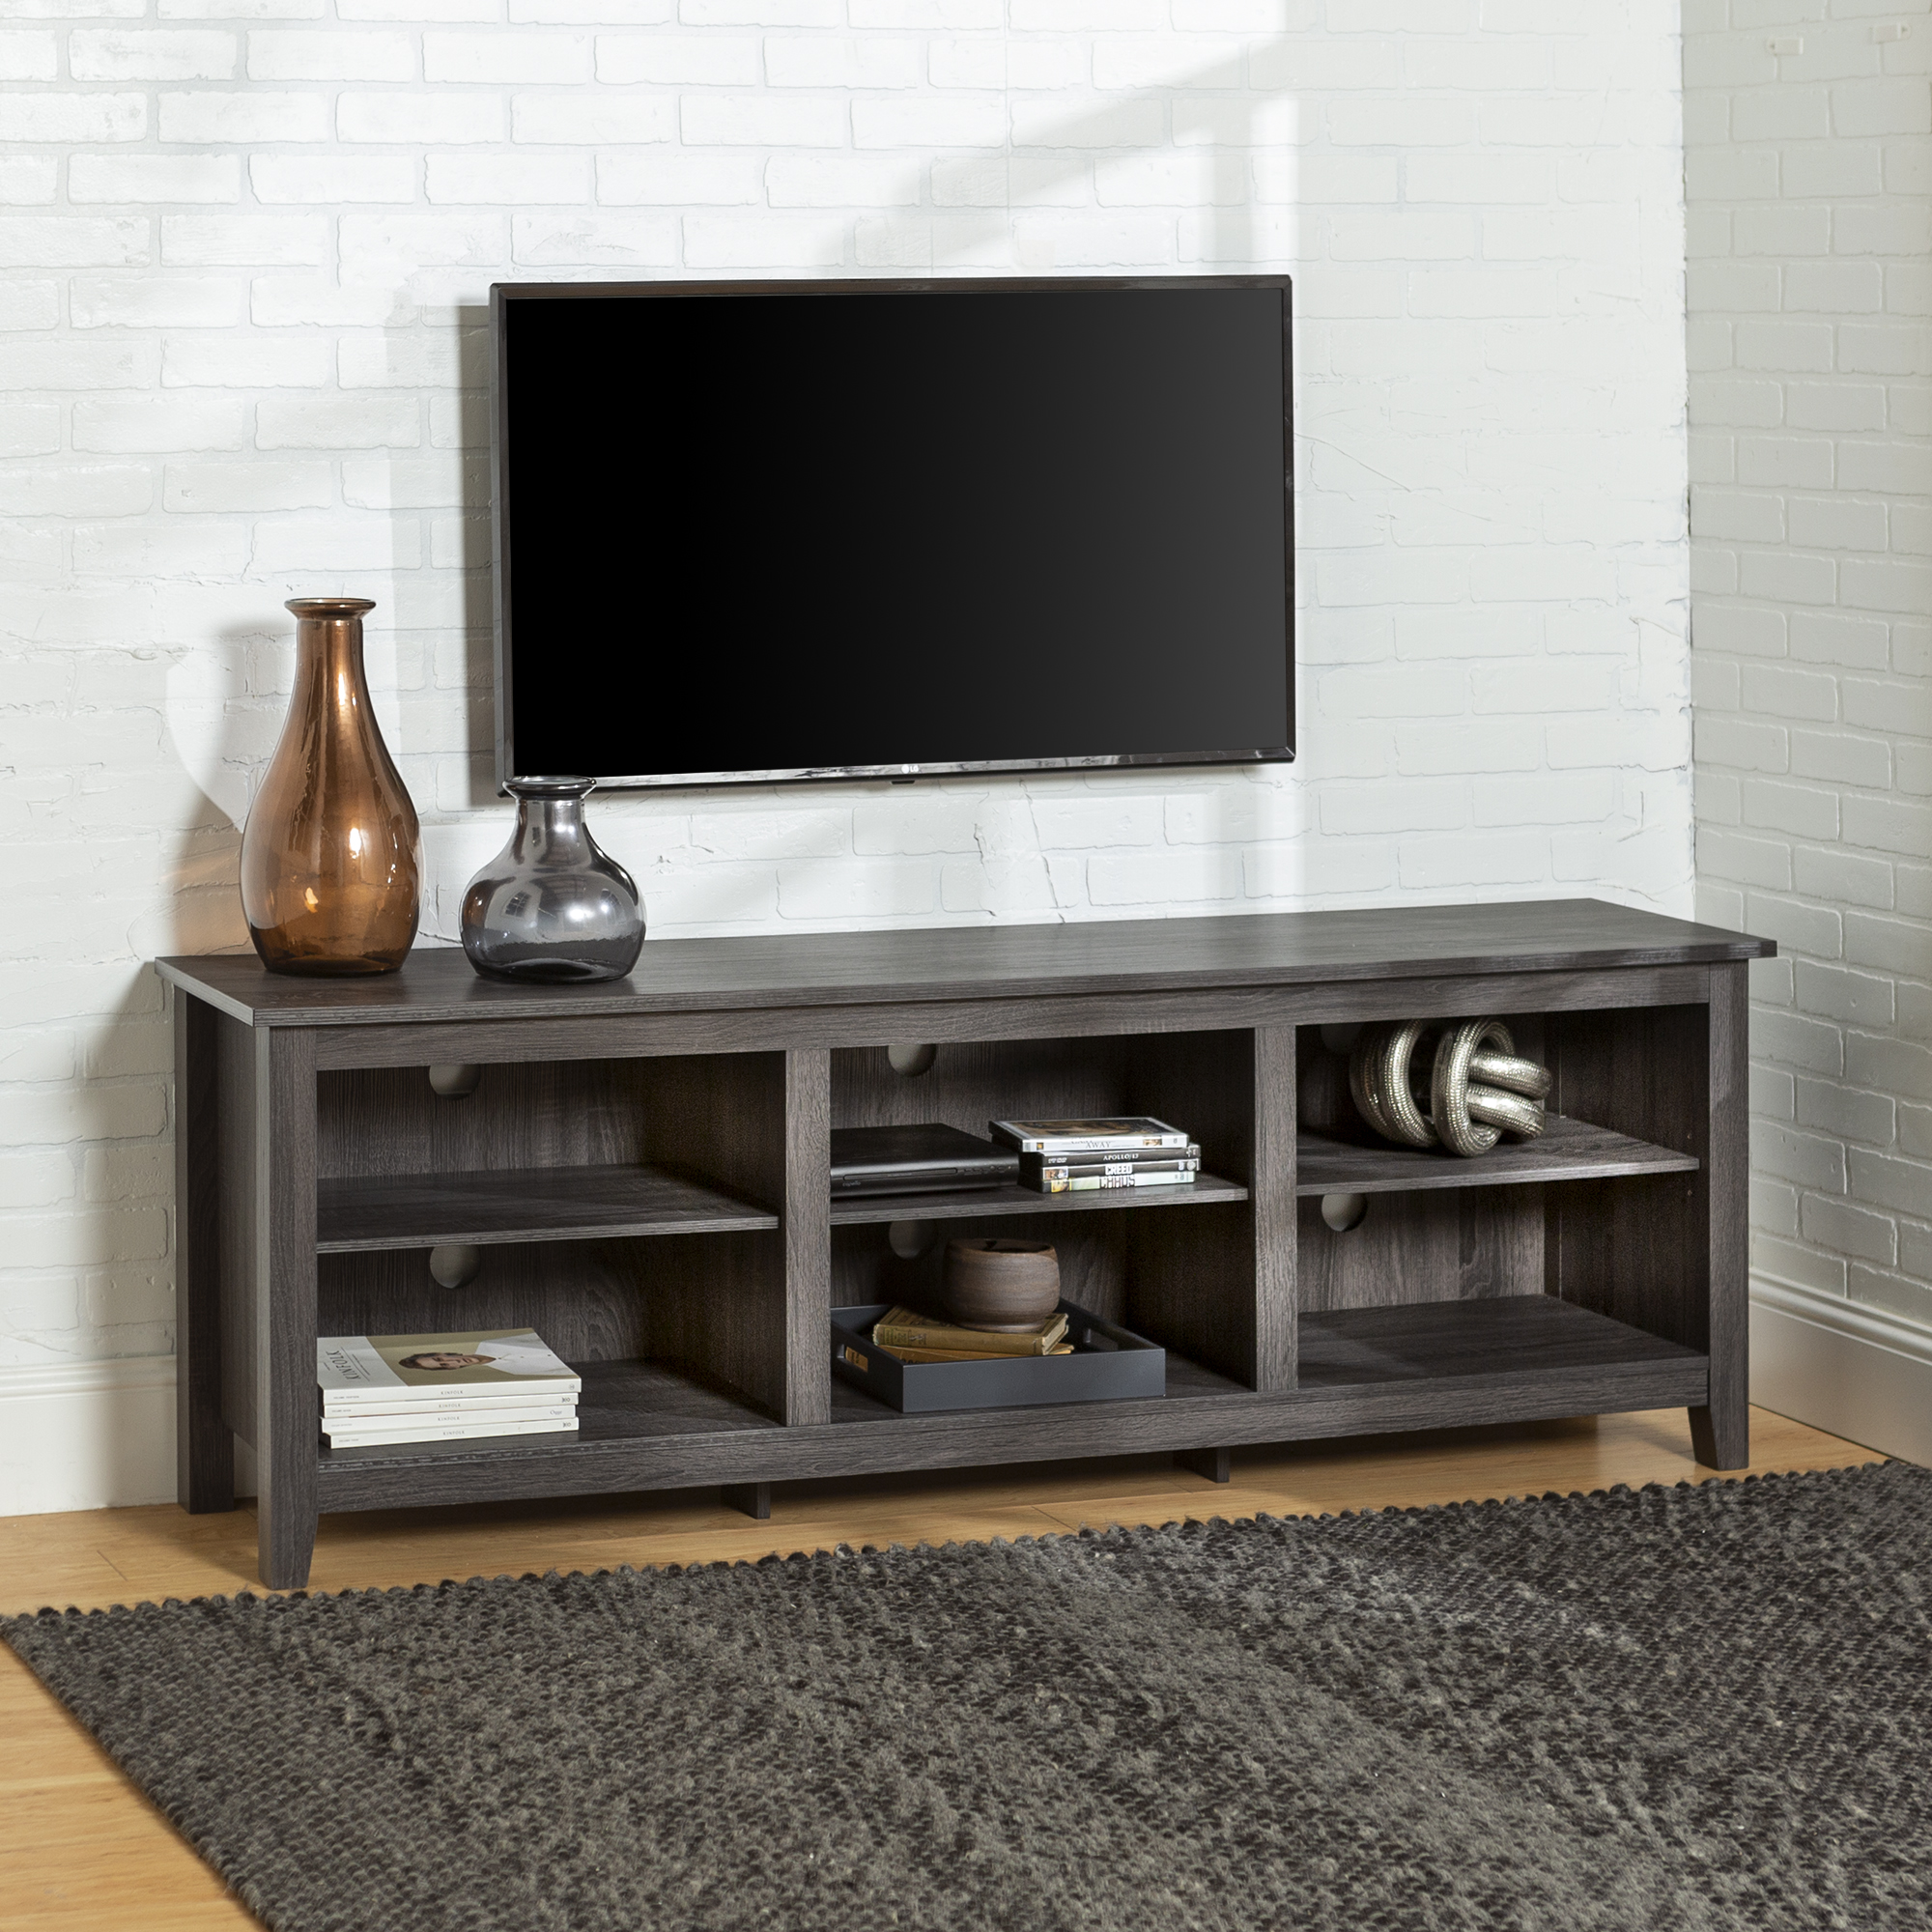 Manor Park Wood TV Media Storage Stand for TV’s up to 78″